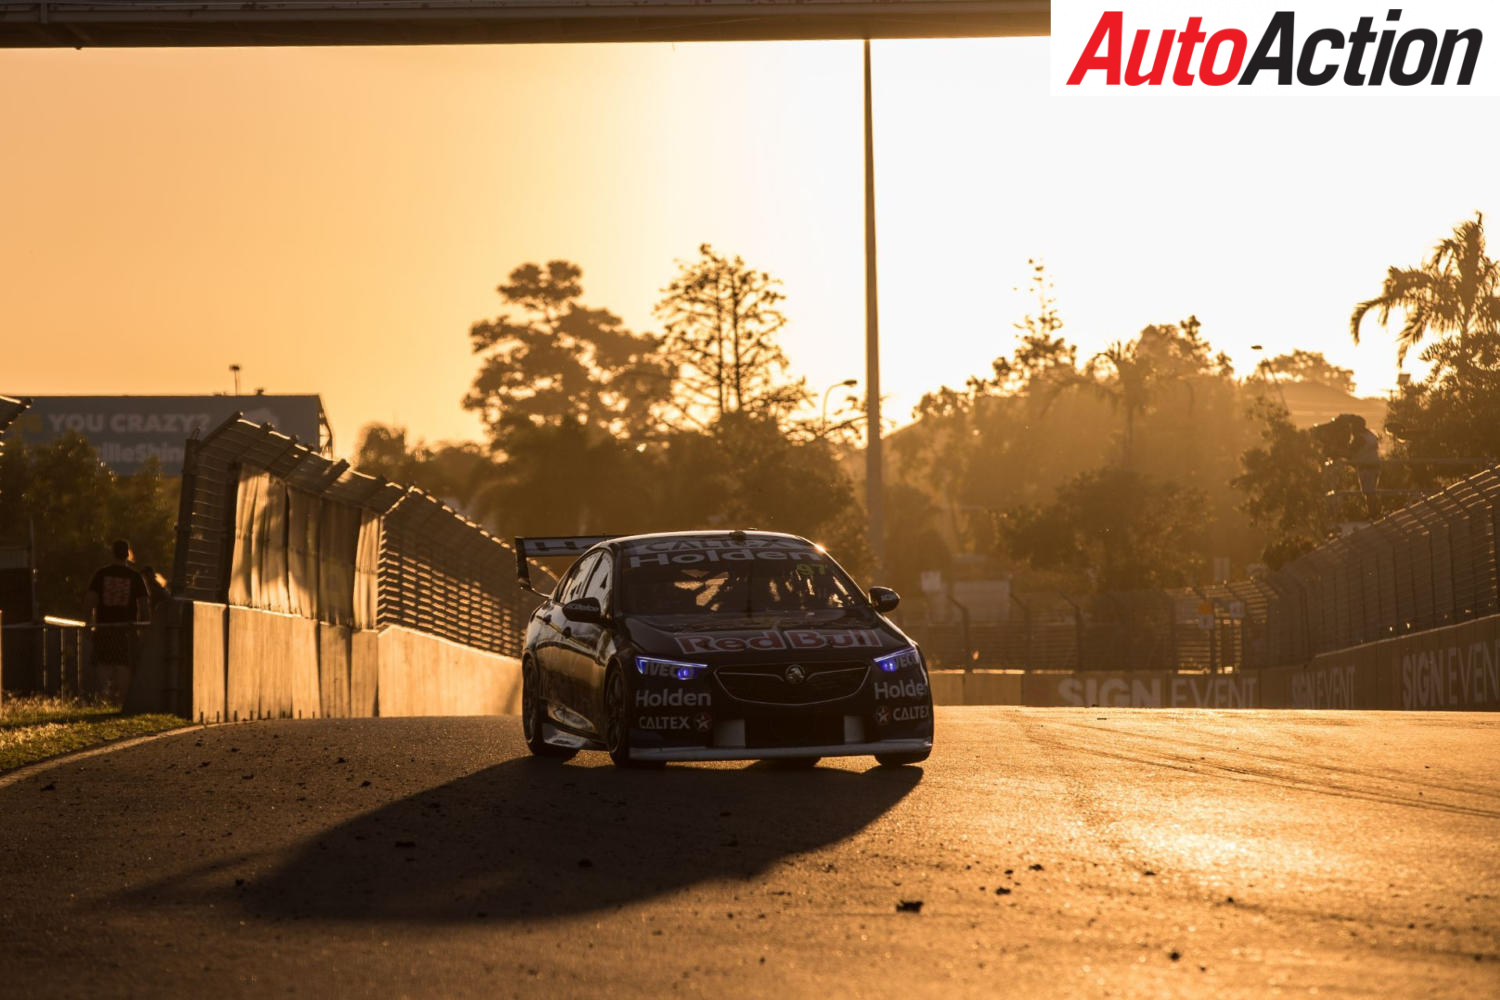 V8 Future to be revealed at Townsville - Photo: InSyde Media